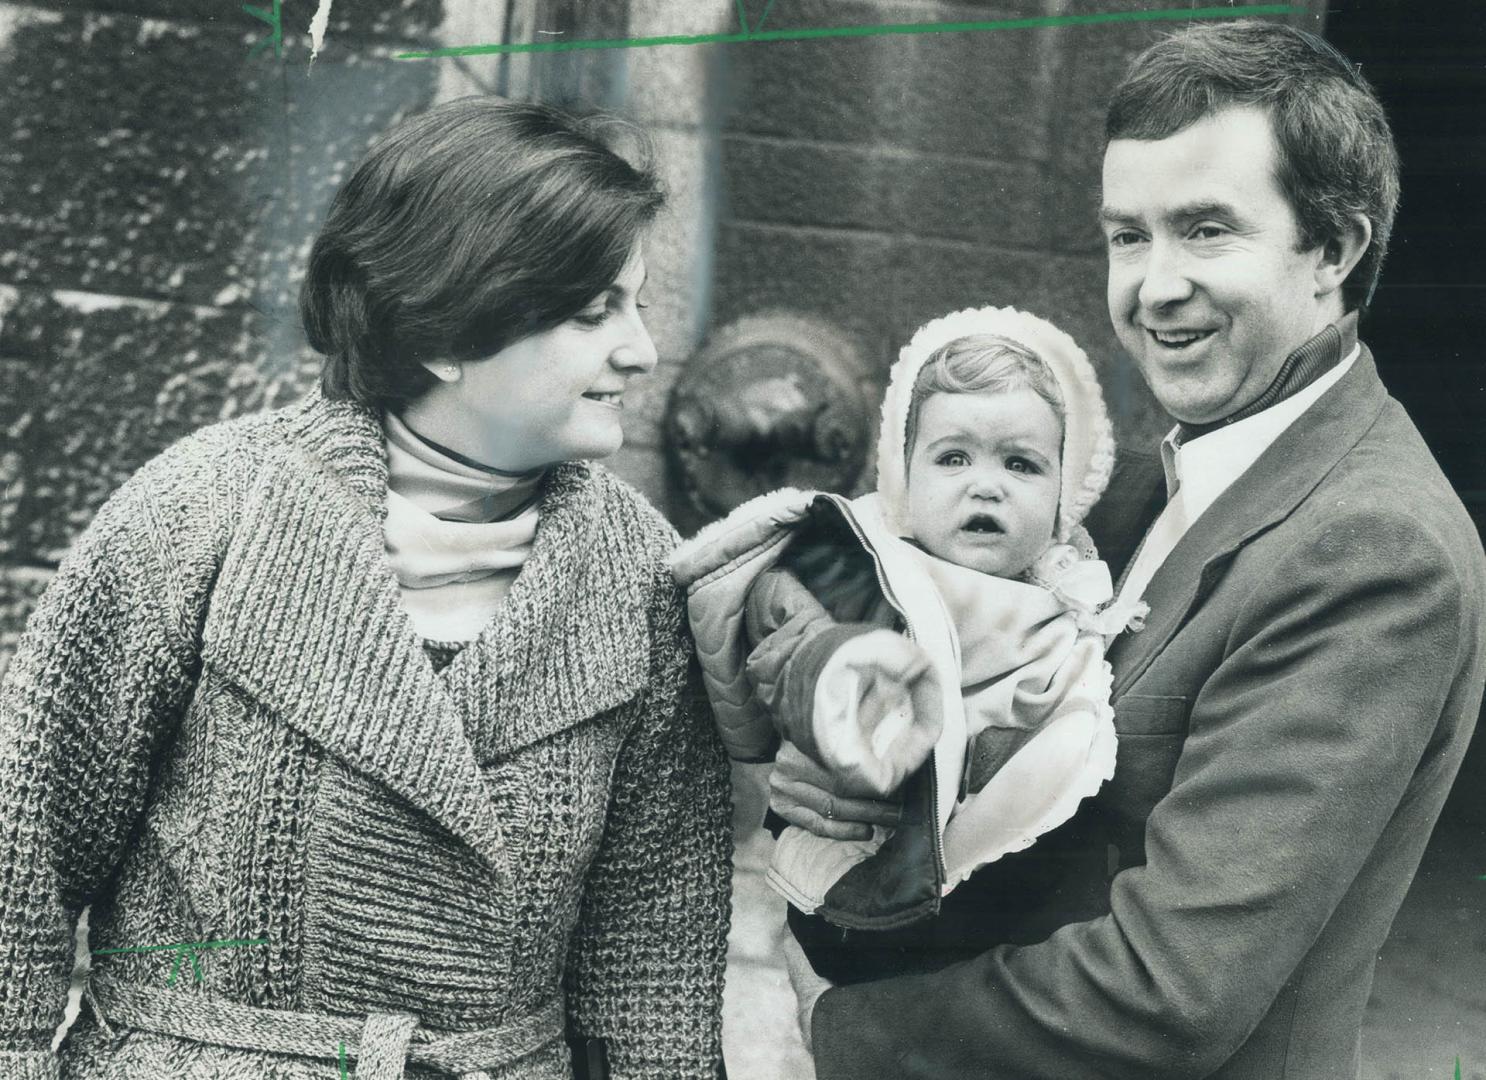 It was a bang-up weekend for Progressive Conservative leader Joe Clark, his wife Maureen McTeer and their daughter Catherine. The family was in Quebec(...)